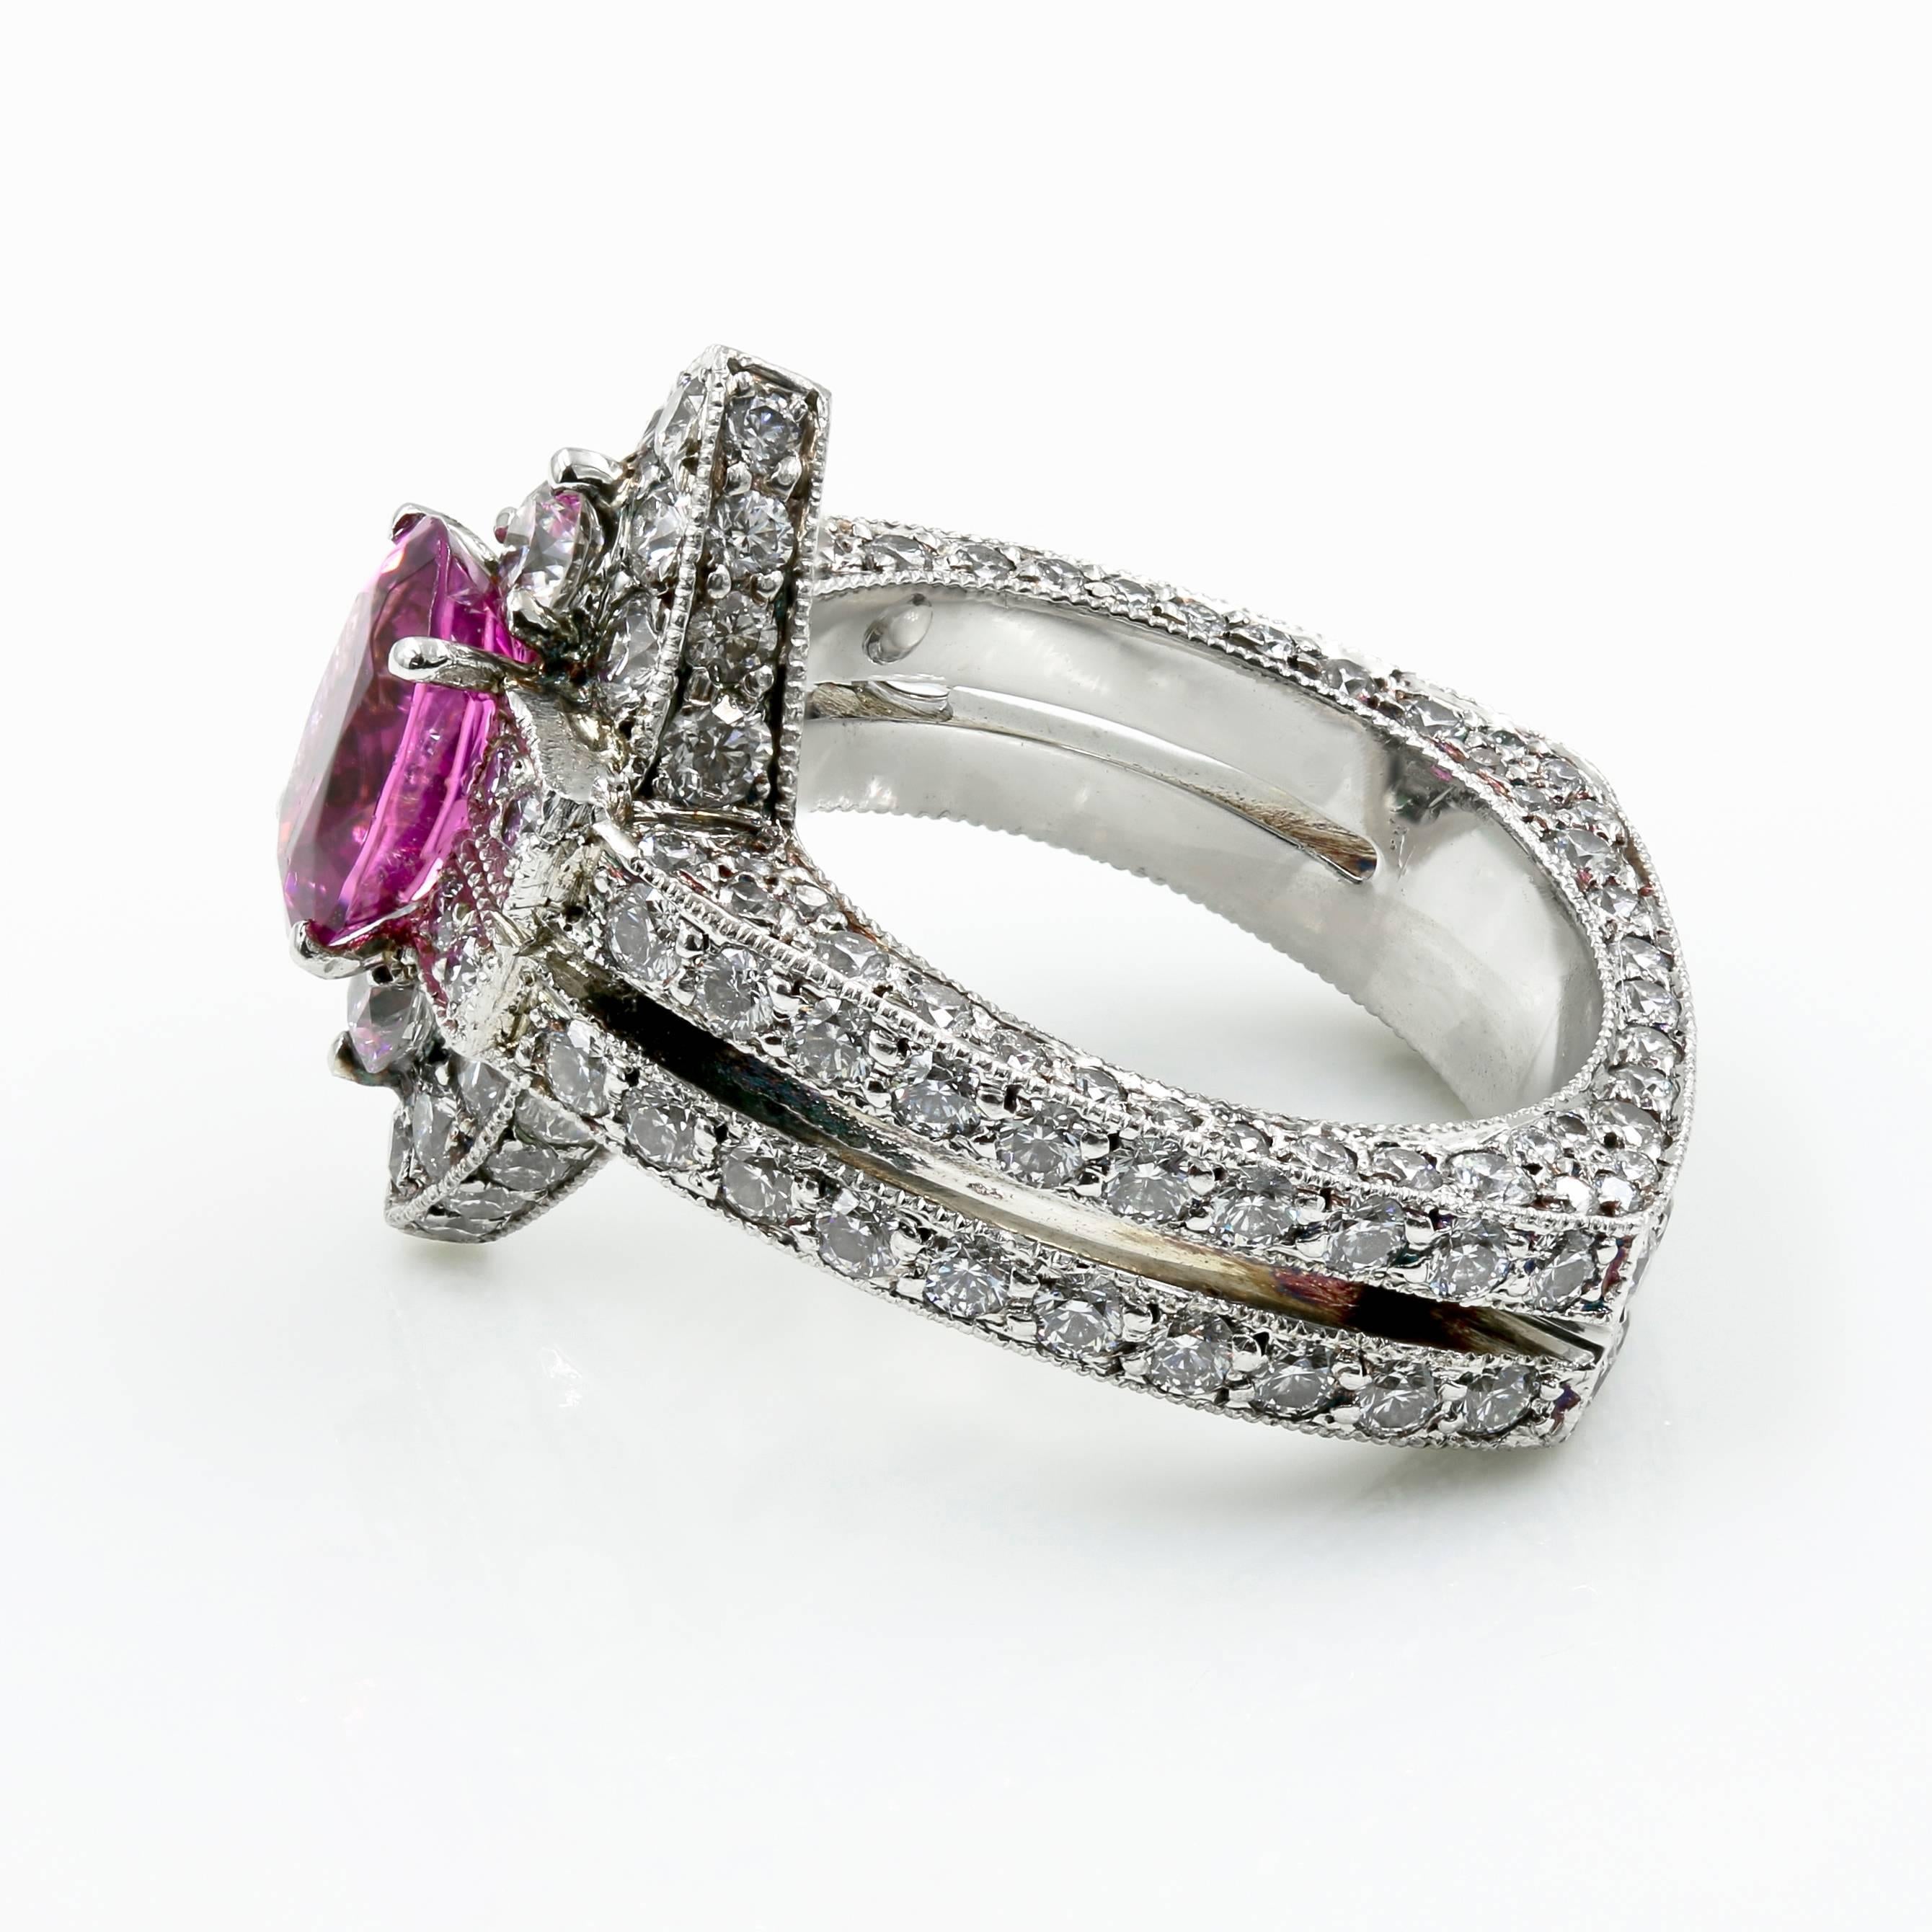 Contemporary One-of-a-Kind 2.65 Carat Natural Pink Spinel and Diamond Ring